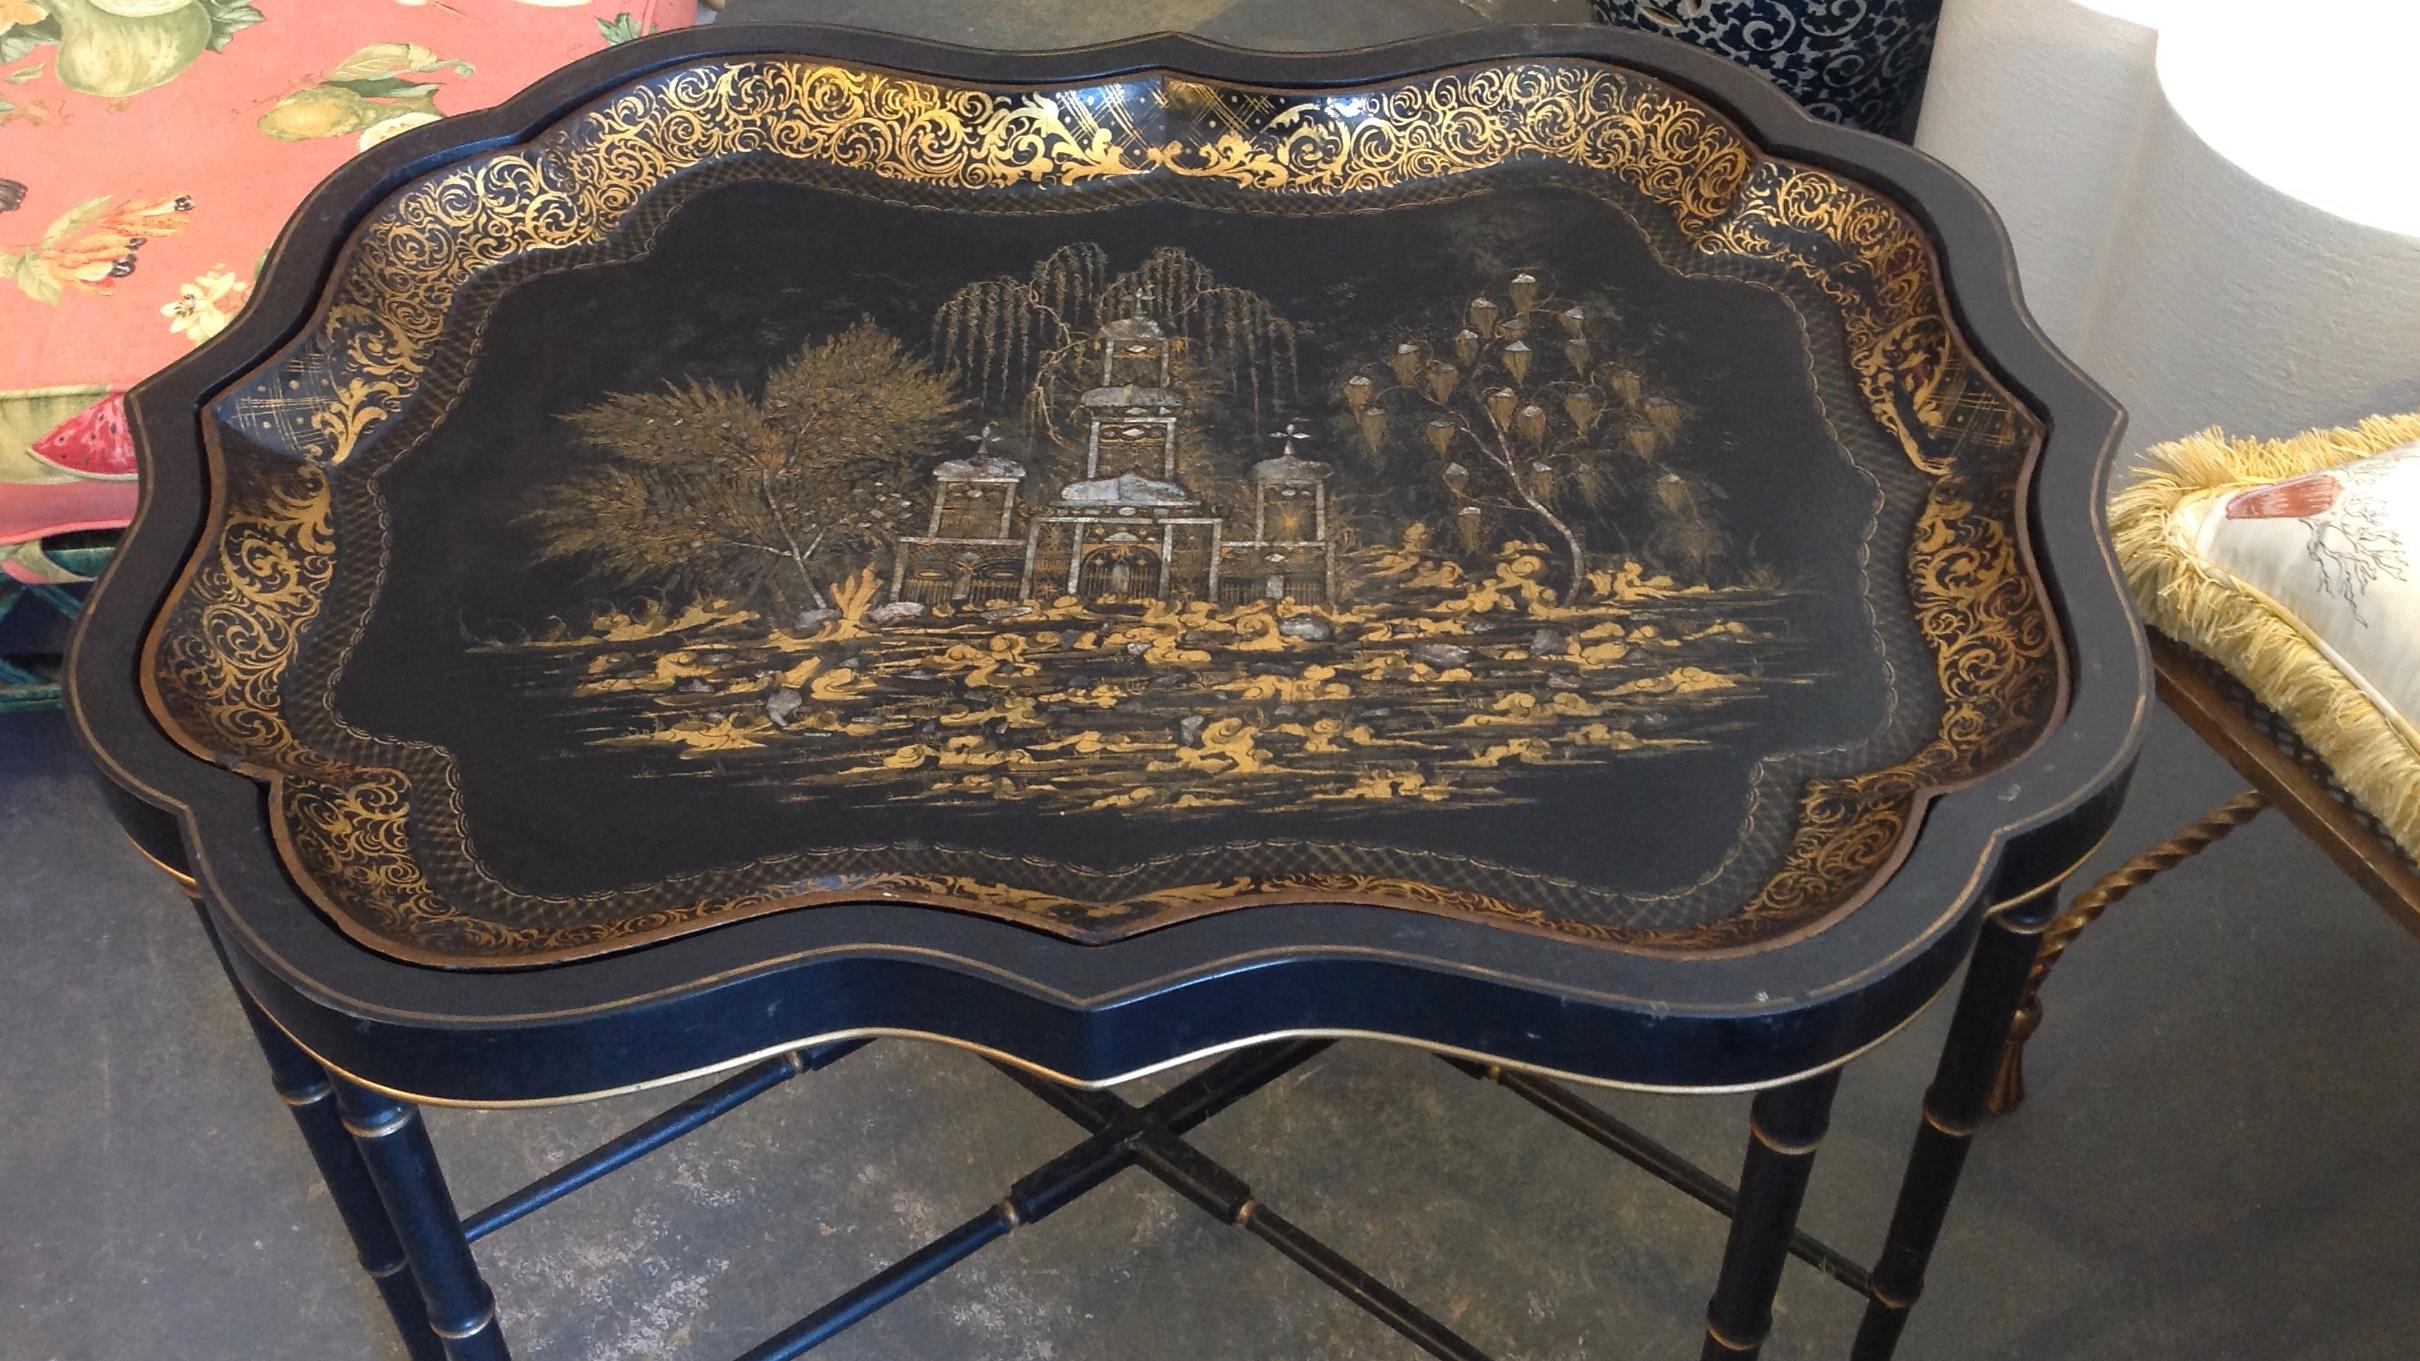 Lacquer 19th Century English Chinoiserie Abalone and Gilt Papier Mâché Tray on Stand